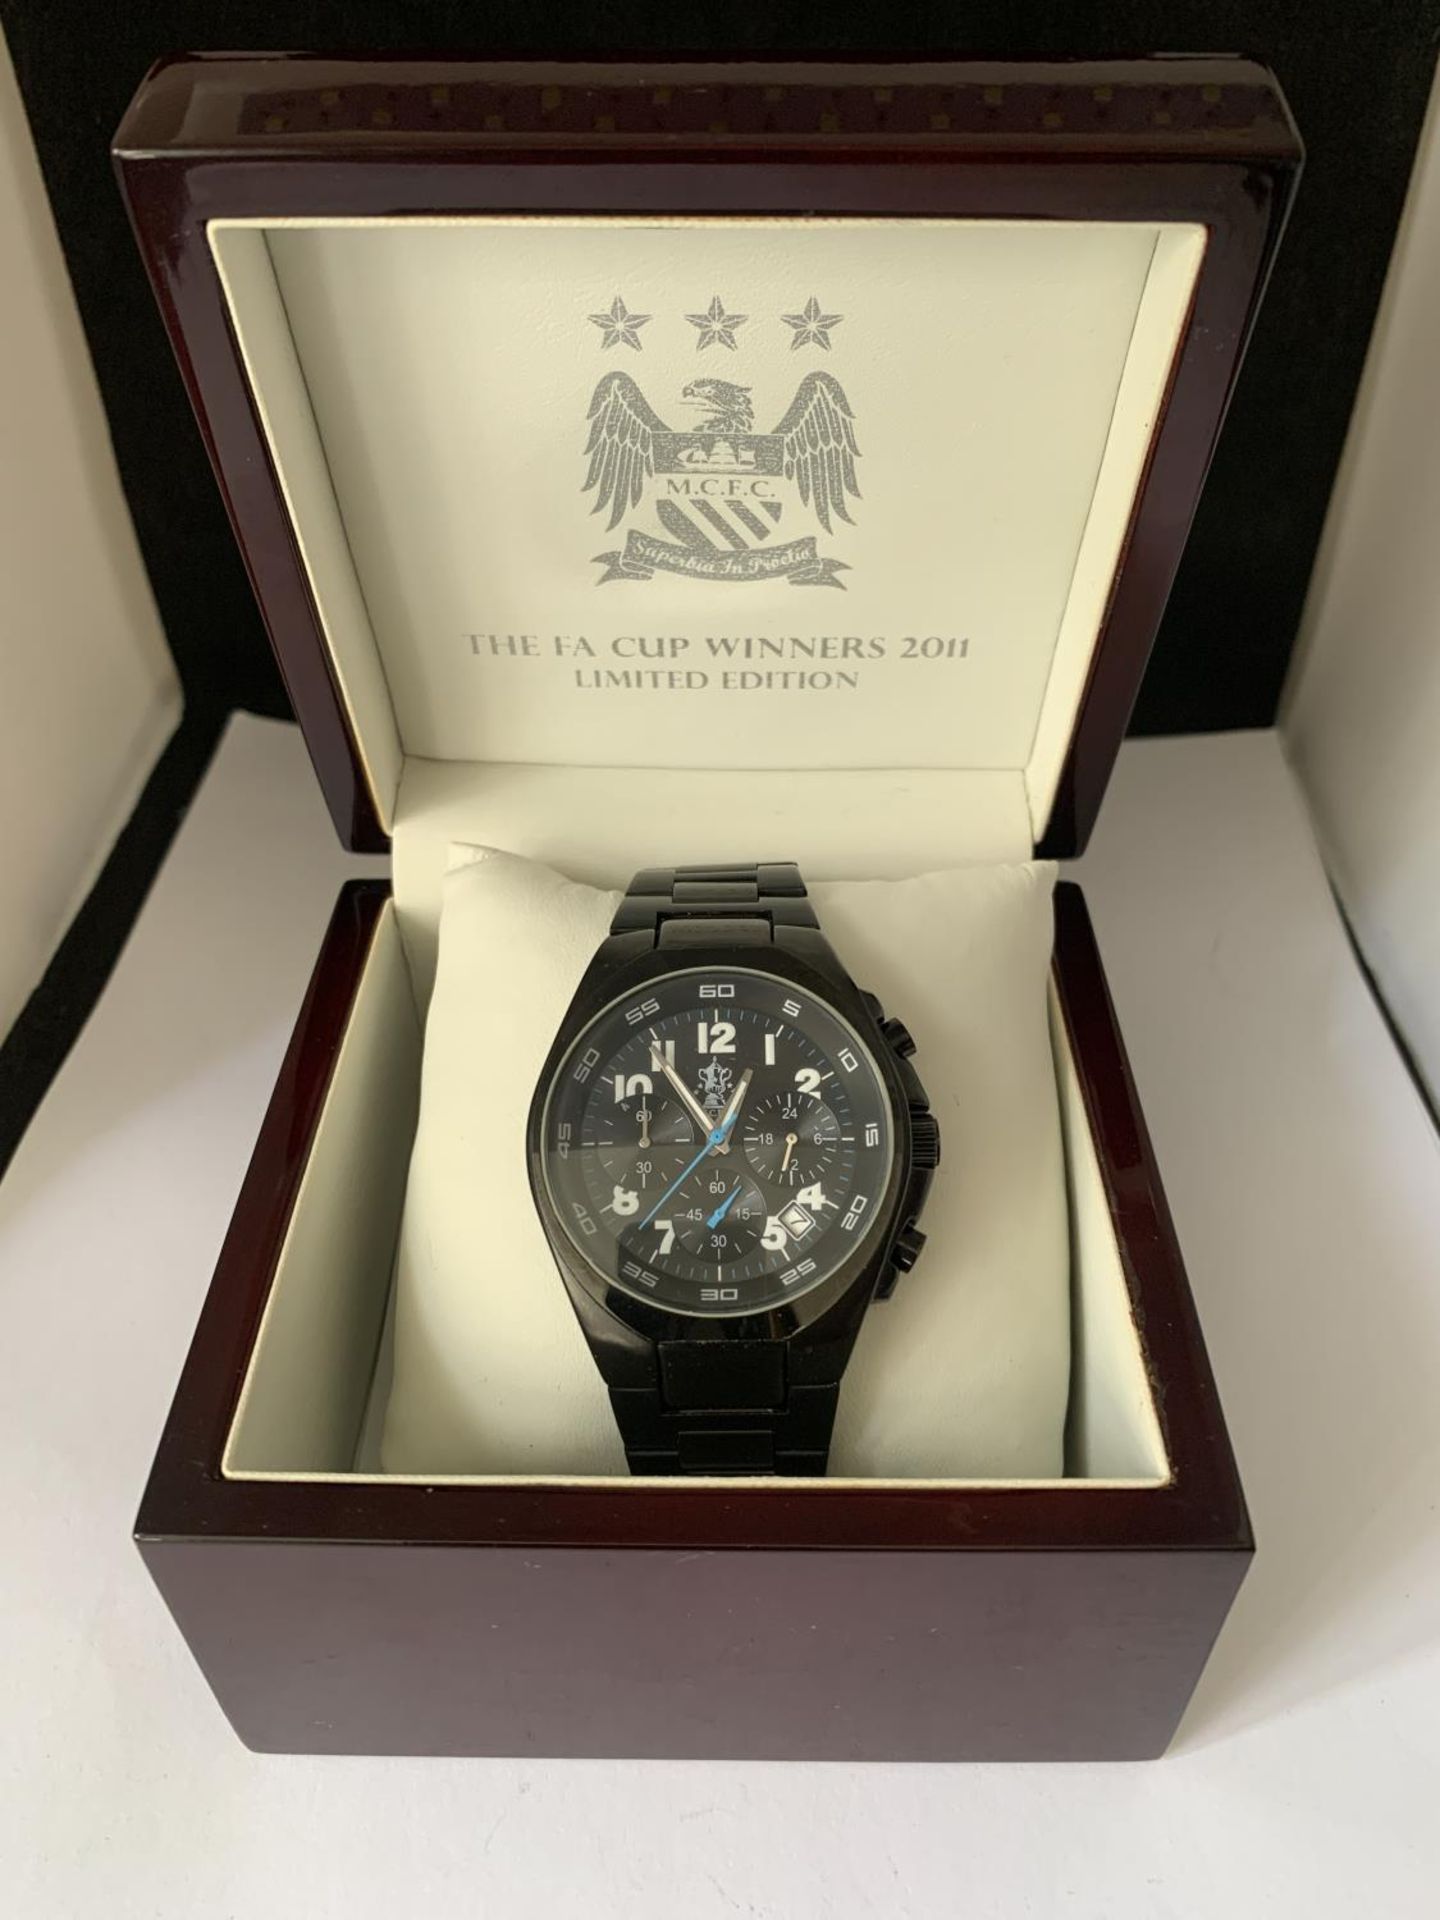 A MANCHESTER CITY FA CUP WINNERS 2011 LIMITED EDITION CHRONOGRAPH WRIST WATCH IN A PRESENTATION